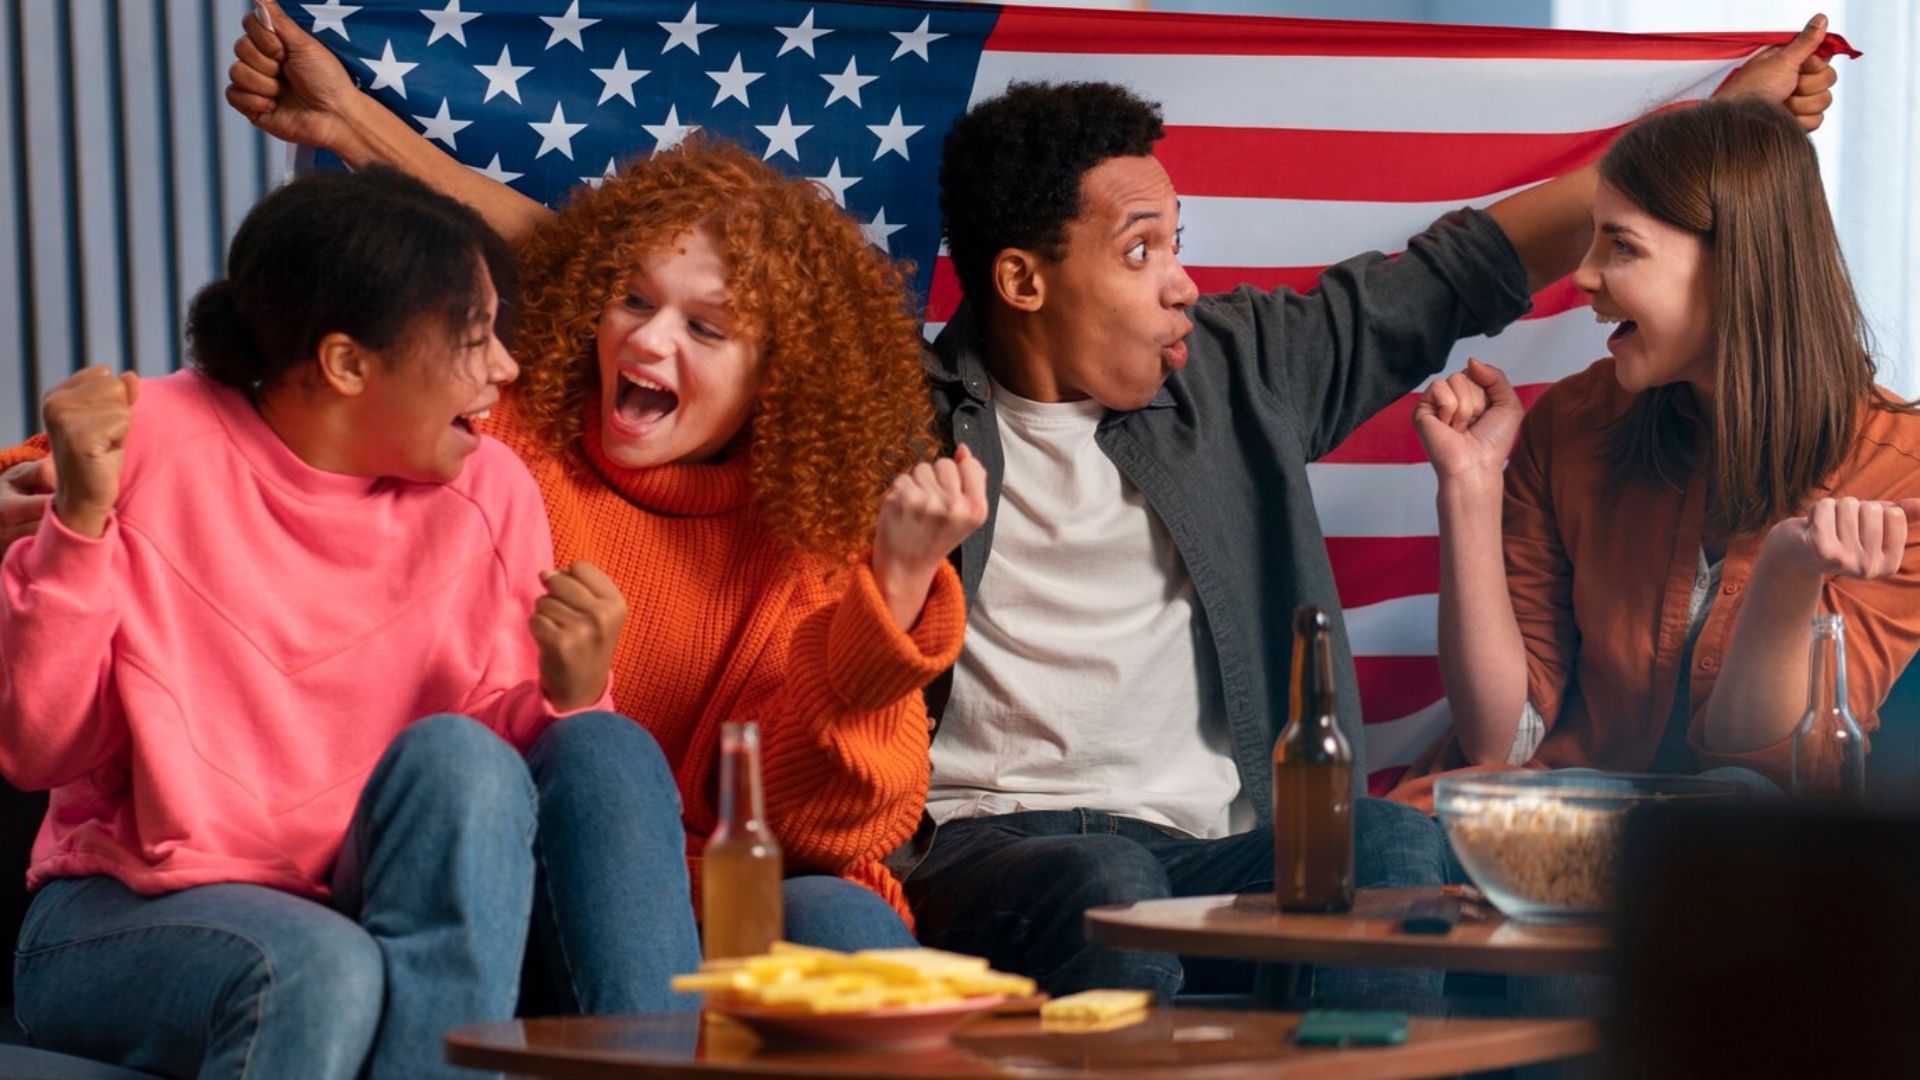 a group of friends watching television, raising the American flag